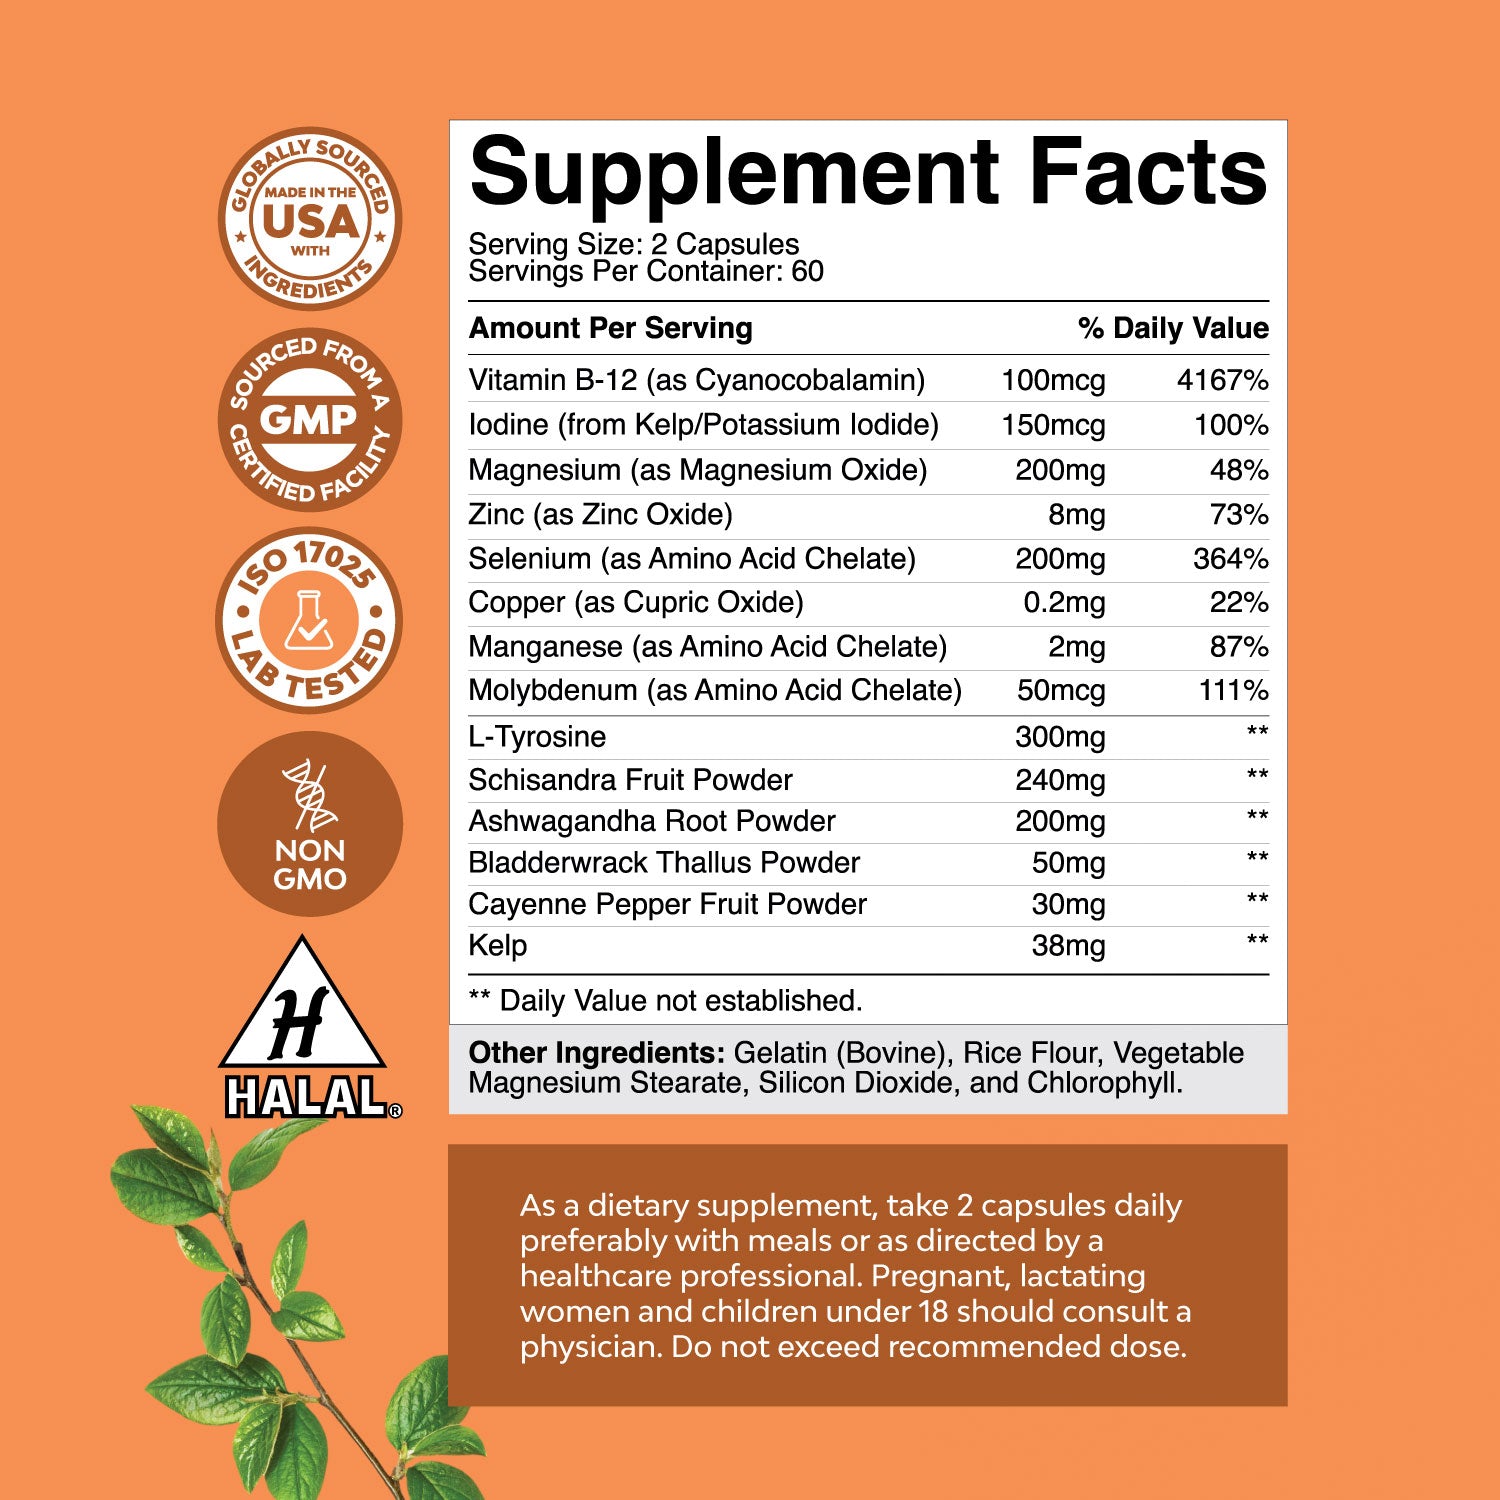 Thyroid Support - Herbal Extracts